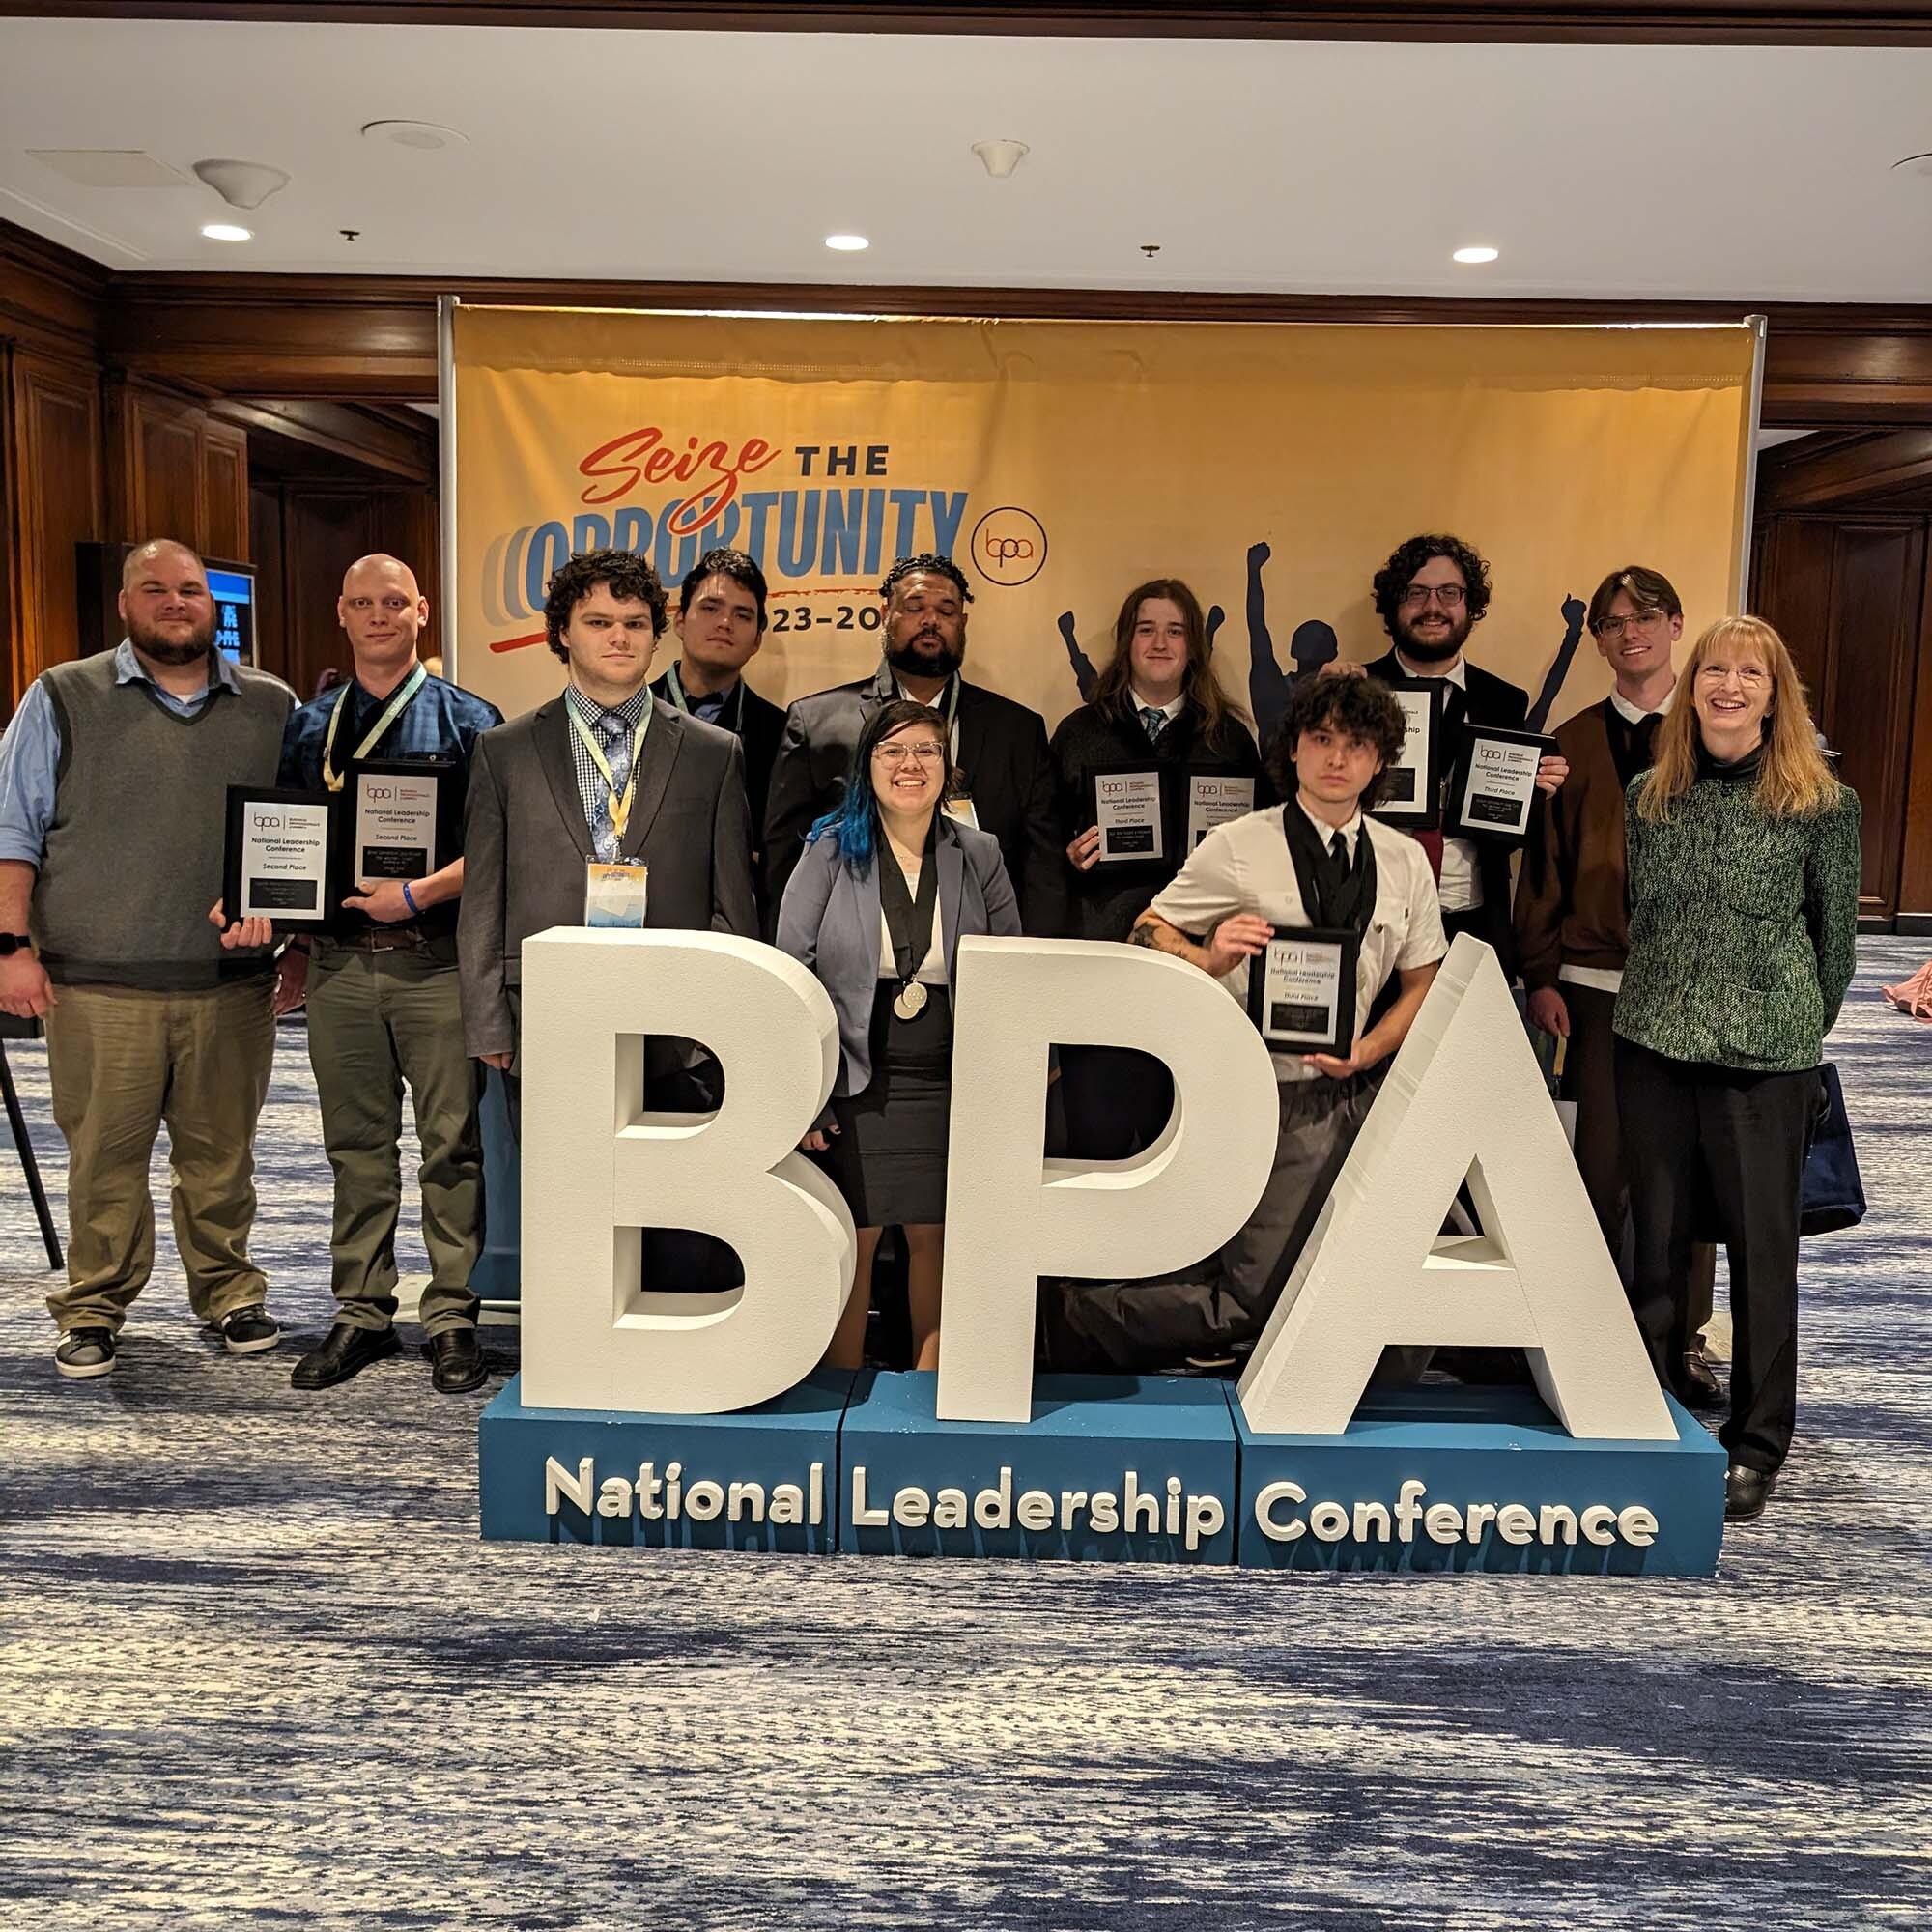 Student from CWI smile and hold award plaques behind large letters that say "BPA, National Leadership Conference."